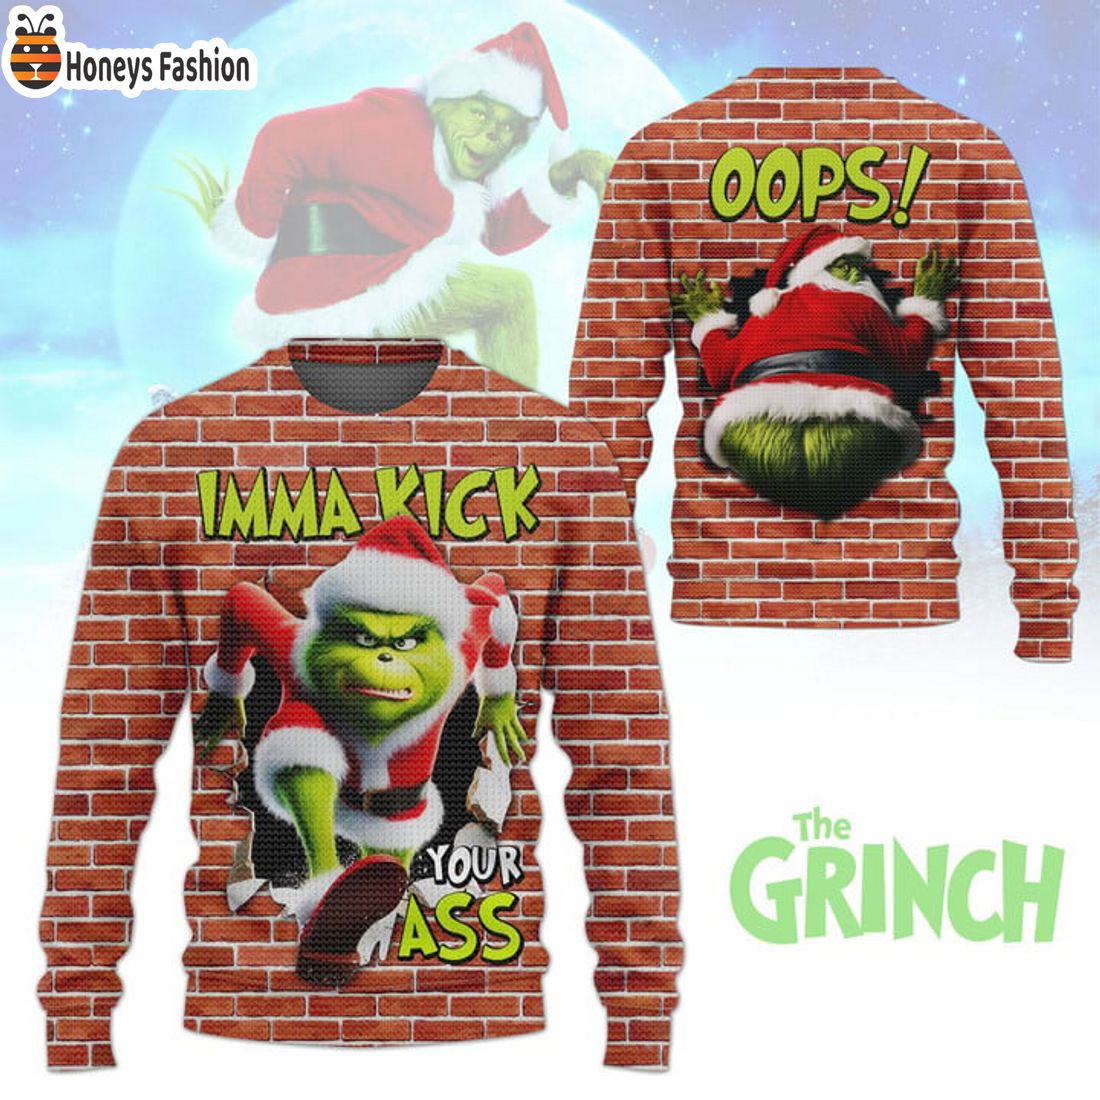 TOP The Grinch Imma Kick You Ass Oops Ugly Christmas Sweater